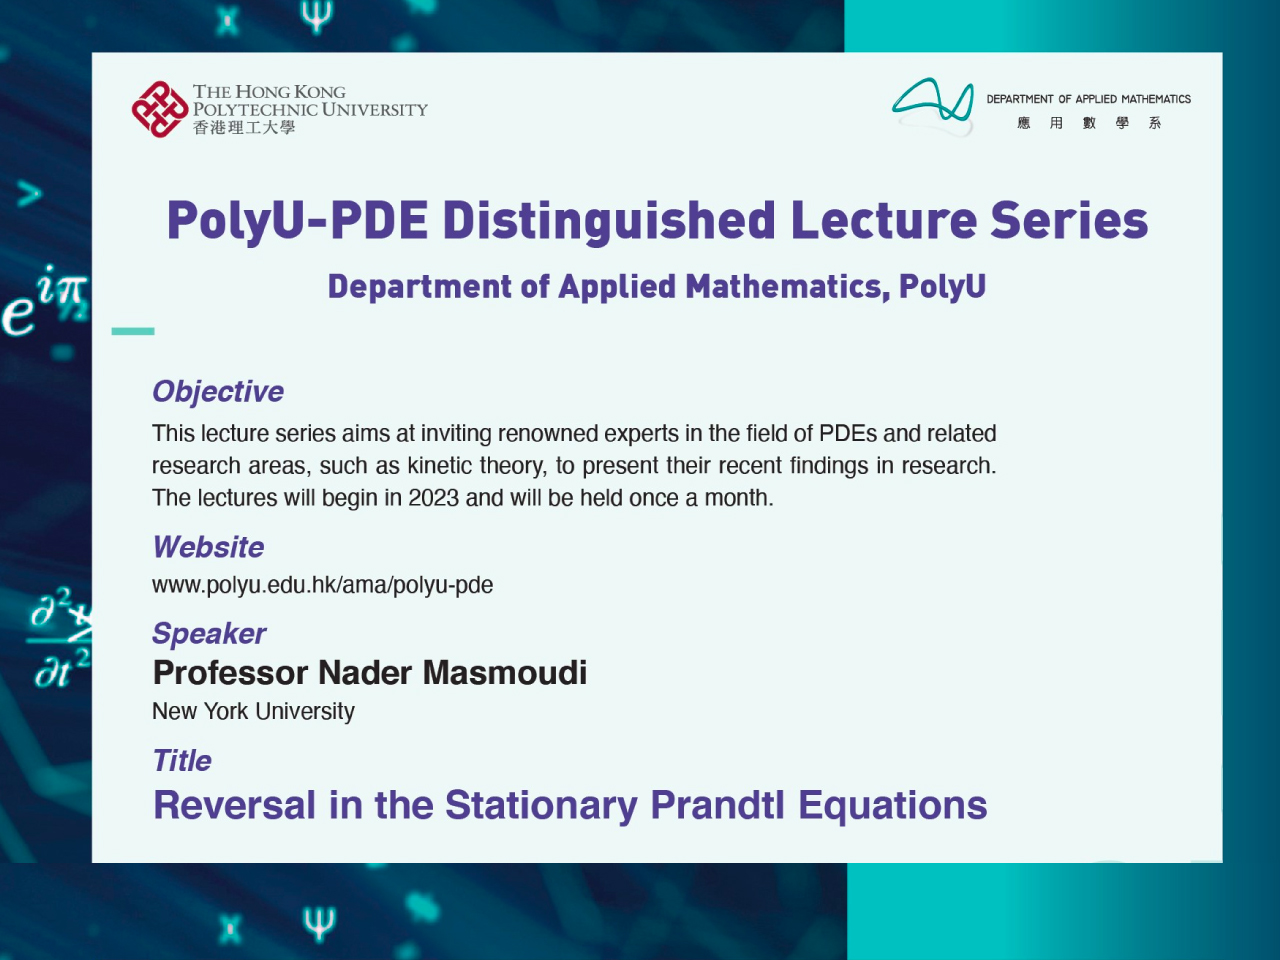 PolyU-PDE distinguished lecture series: reversal in the stationary Prandtl equations